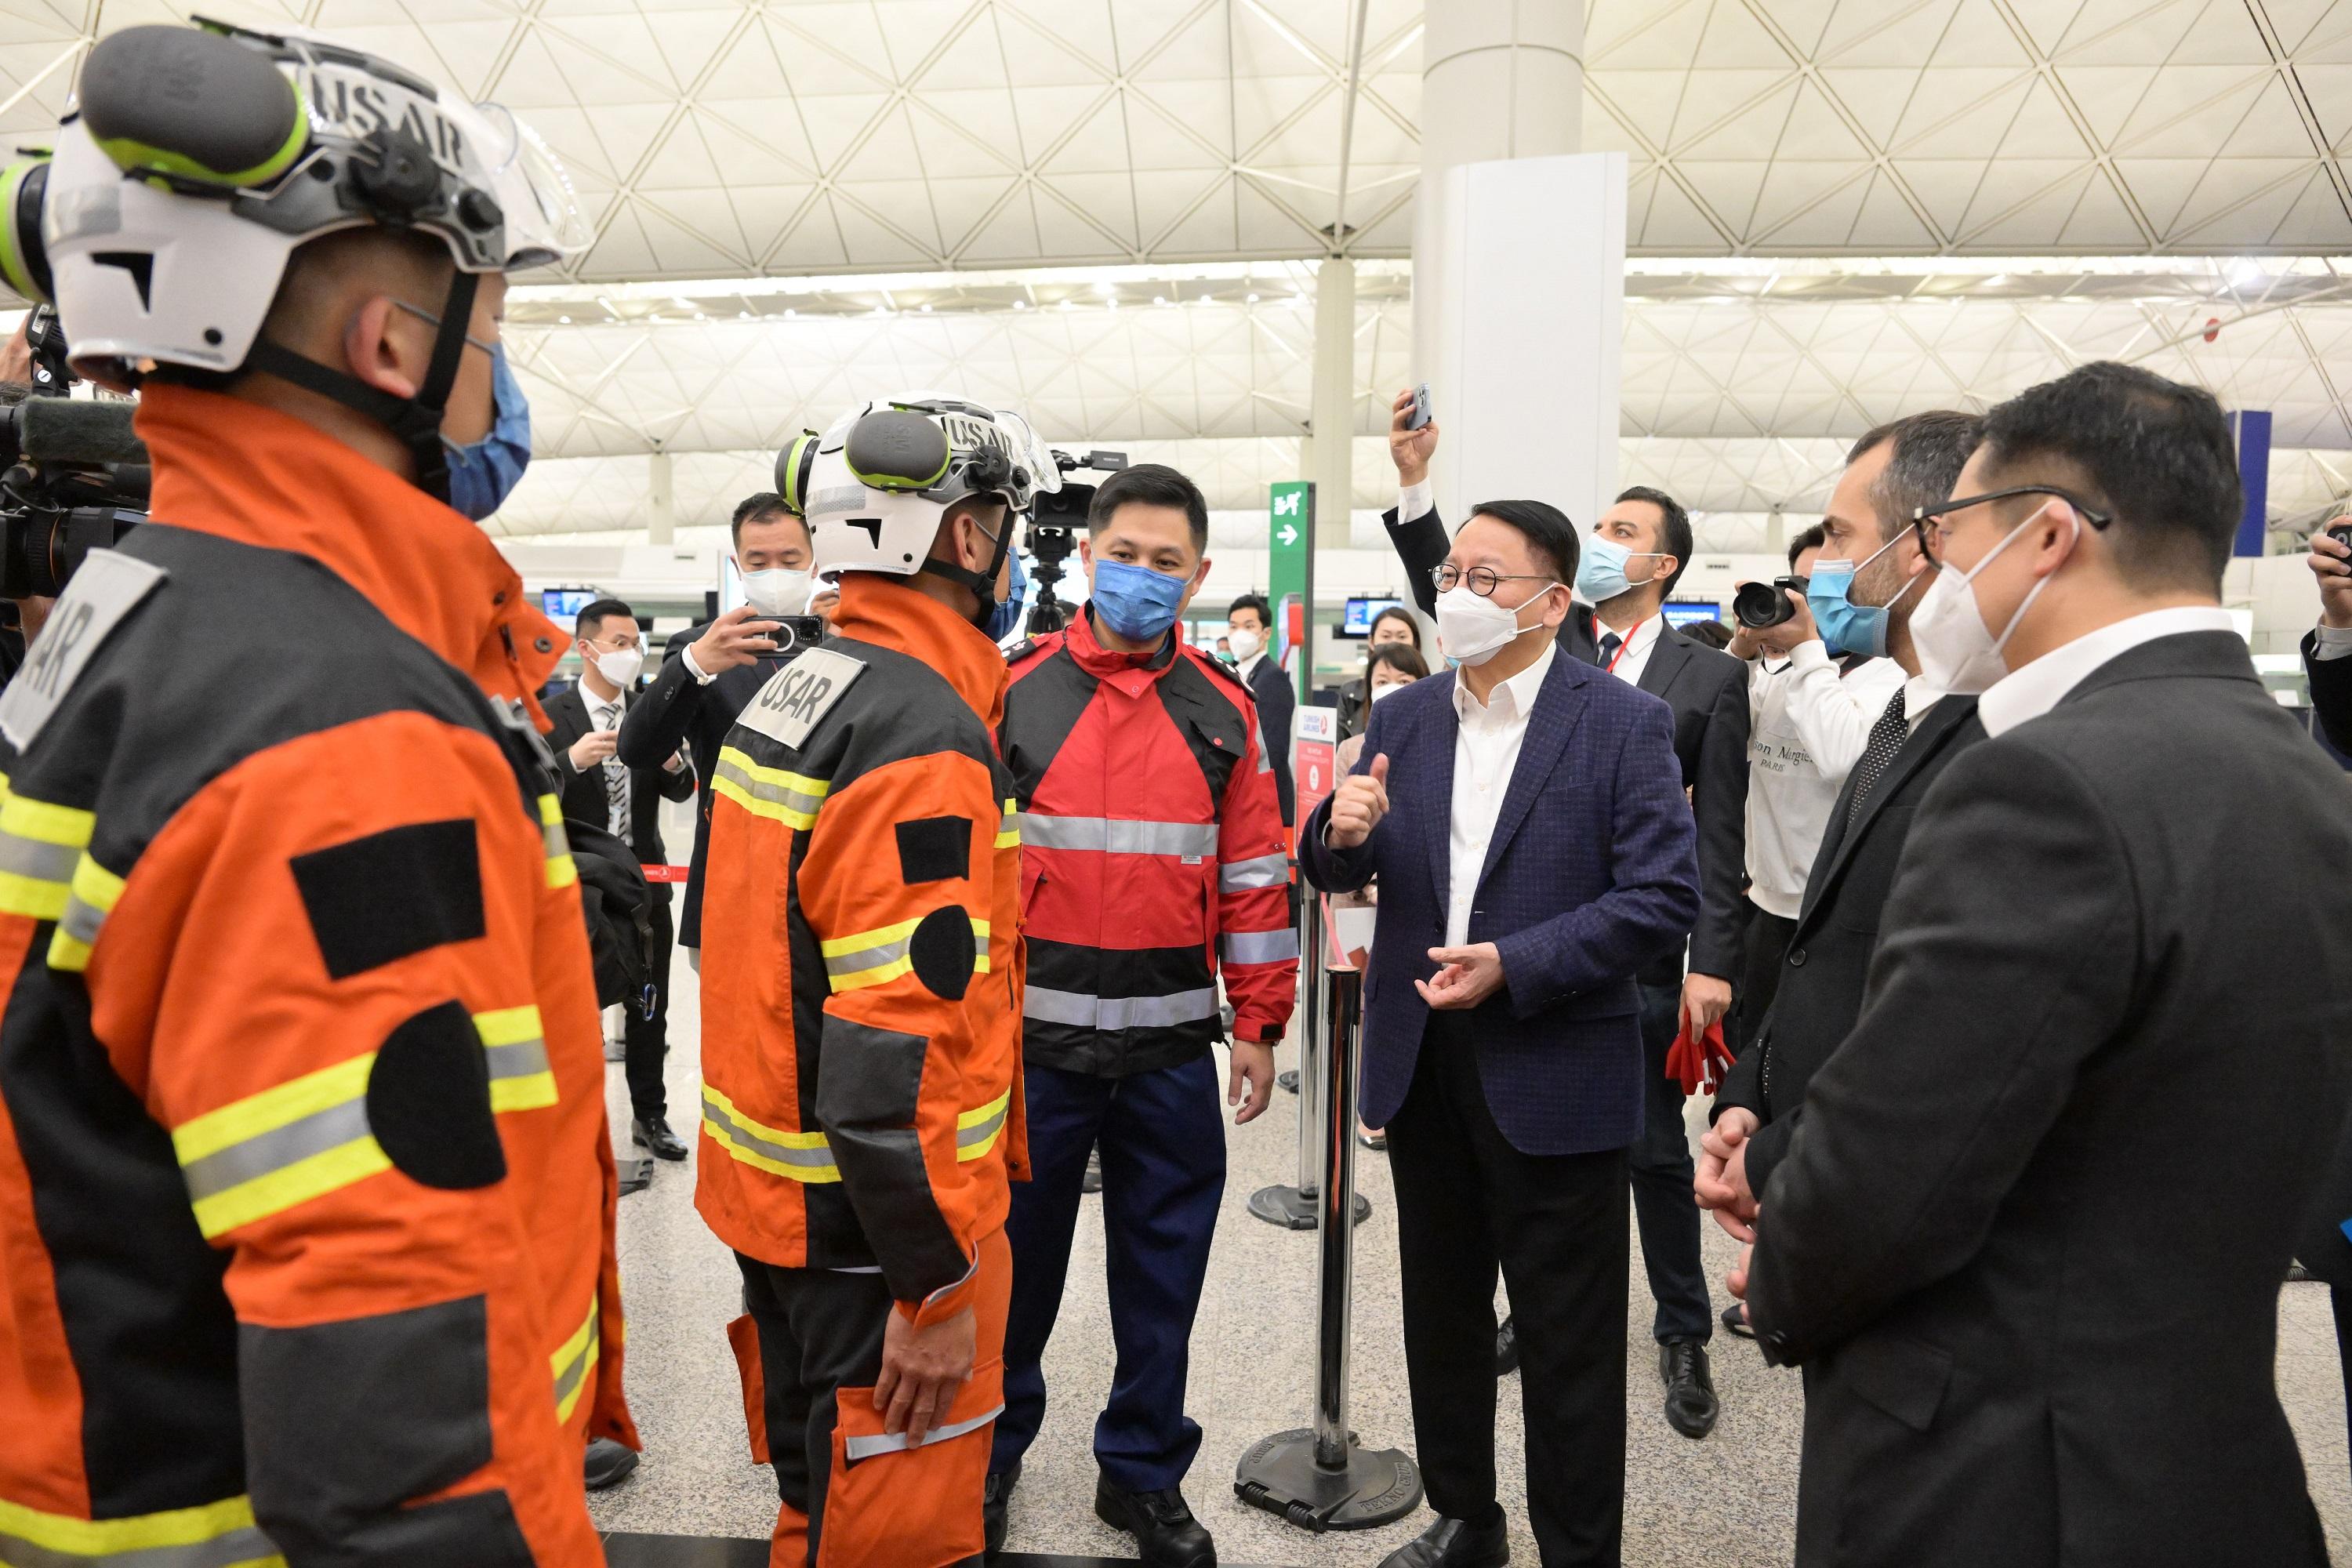 The Hong Kong Special Administrative Region (HKSAR) Government sent a 59-strong search and rescue team to the quake-stricken areas in Türkiye tonight (February 8) to assist in the search and rescue work. Photo shows (from right) the Secretary for Security, Mr Tang Ping-keung; the Consul General of Türkiye in Hong Kong, Mr Peyami Kalyoncu; the Acting Chief Executive, Mr Chan Kwok-ki; and the Director of Fire Services, Mr Andy Yeung, talking with the HKSAR search and rescue team.